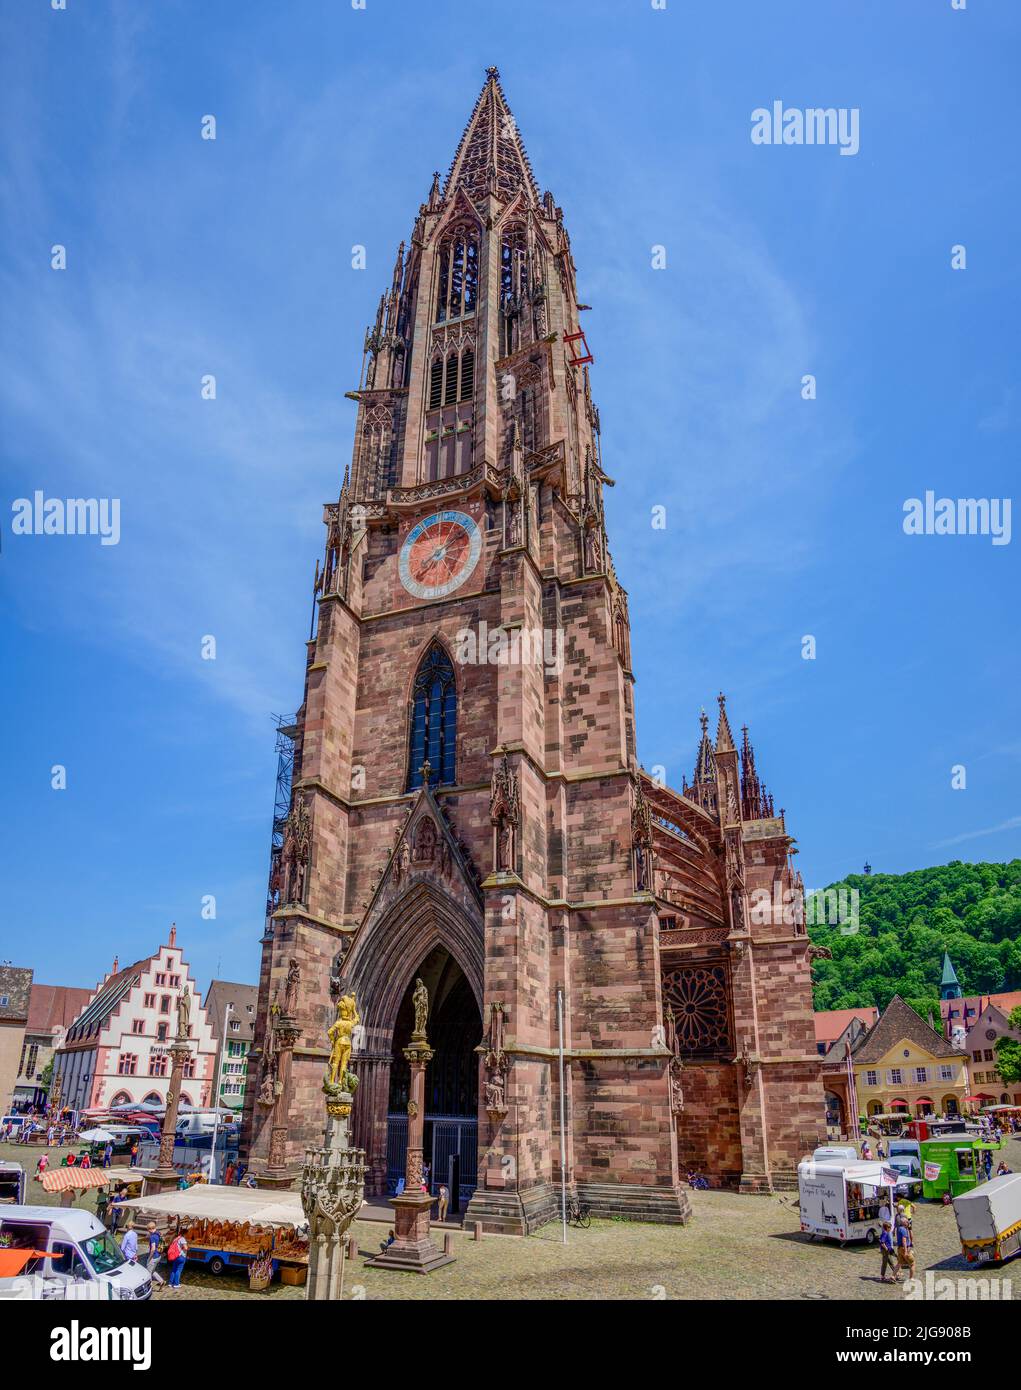 Germany, Baden-Württemberg, Black Forest, Freiburg, the cathedral. Stock Photo